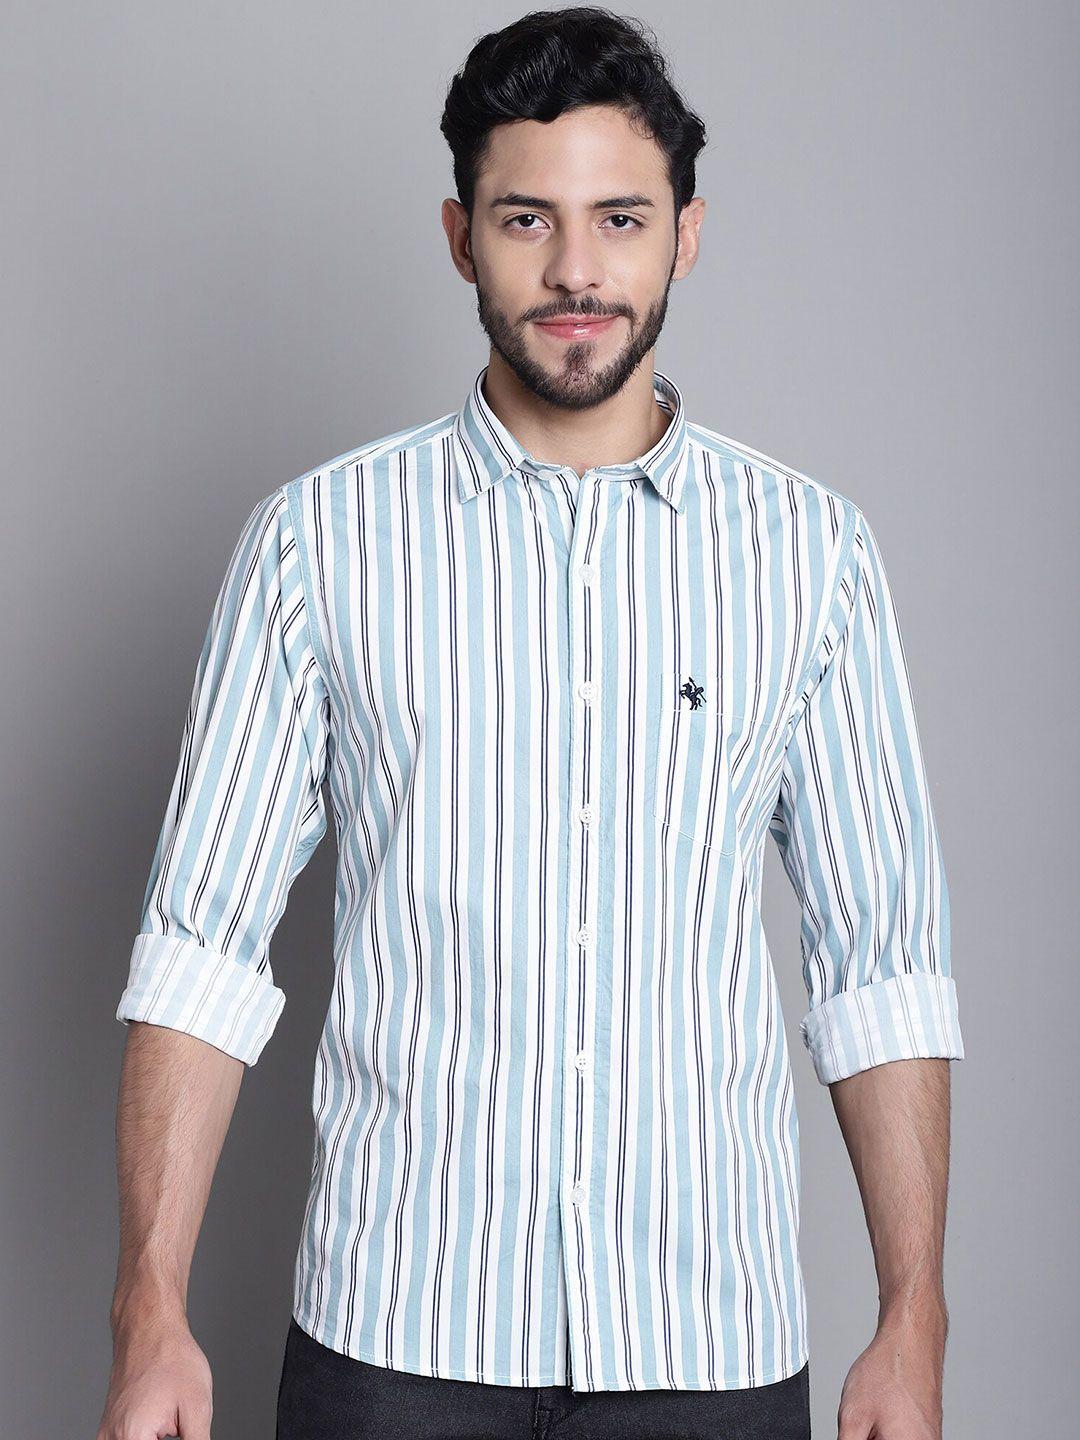 cantabil striped comfort regular fit cotton casual shirt